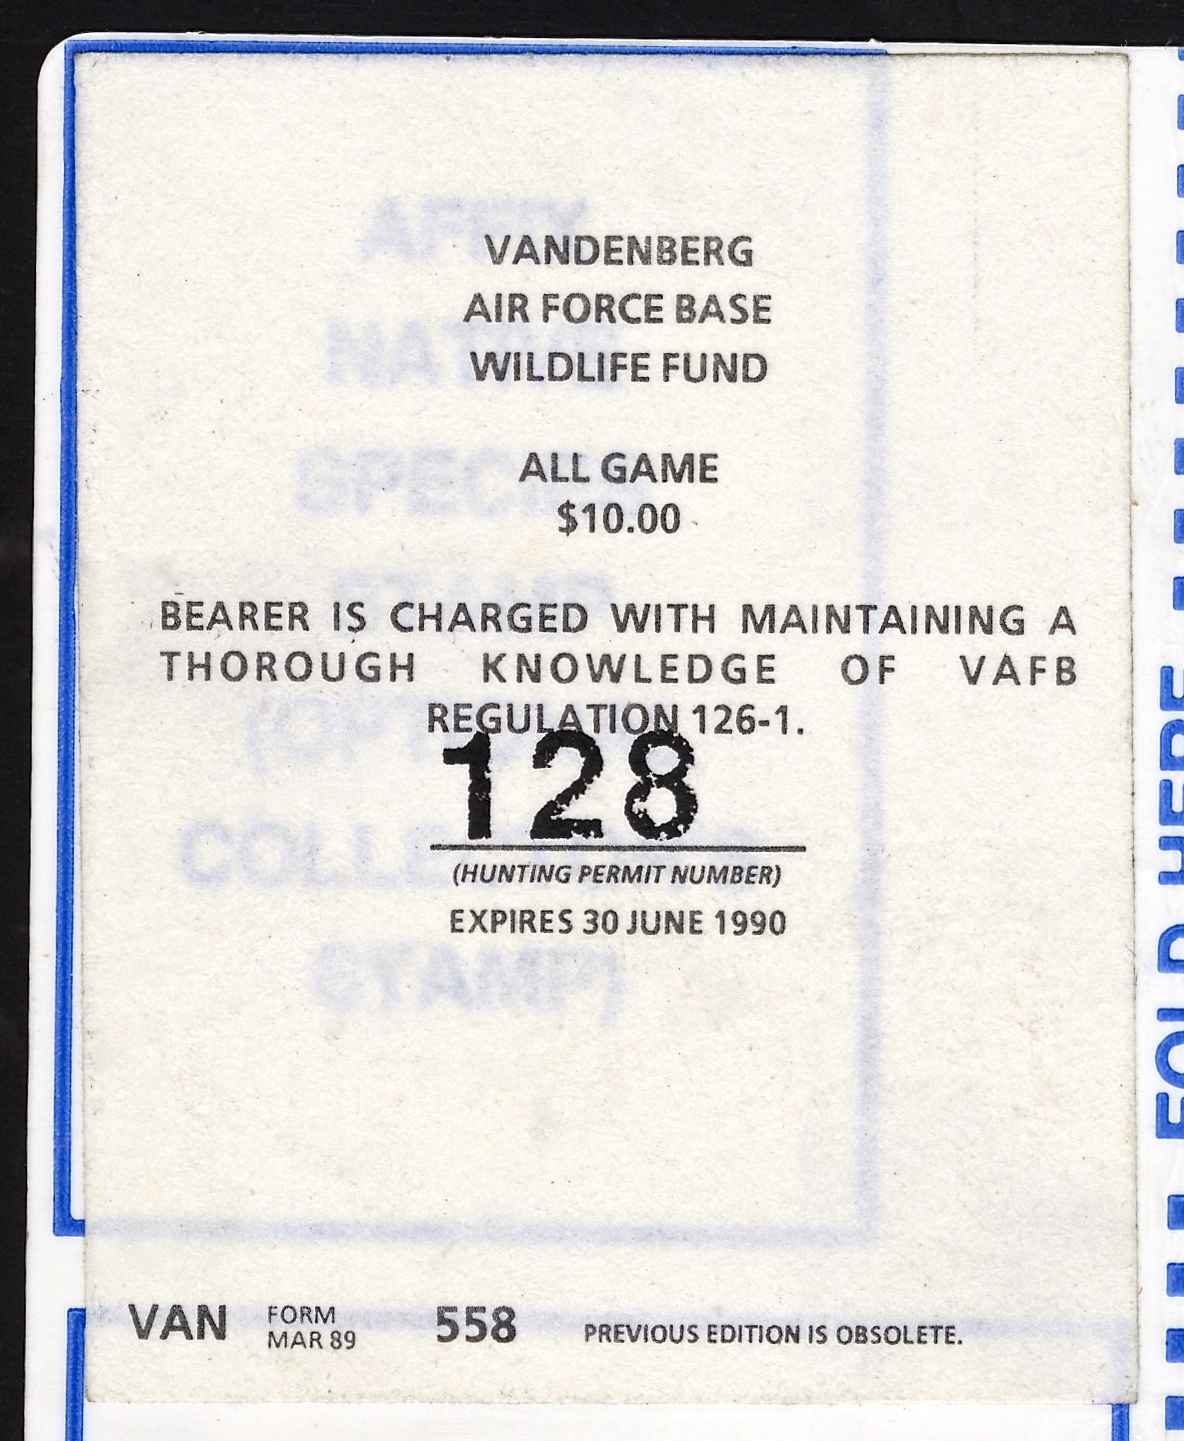 1989-90 VAFB All Game